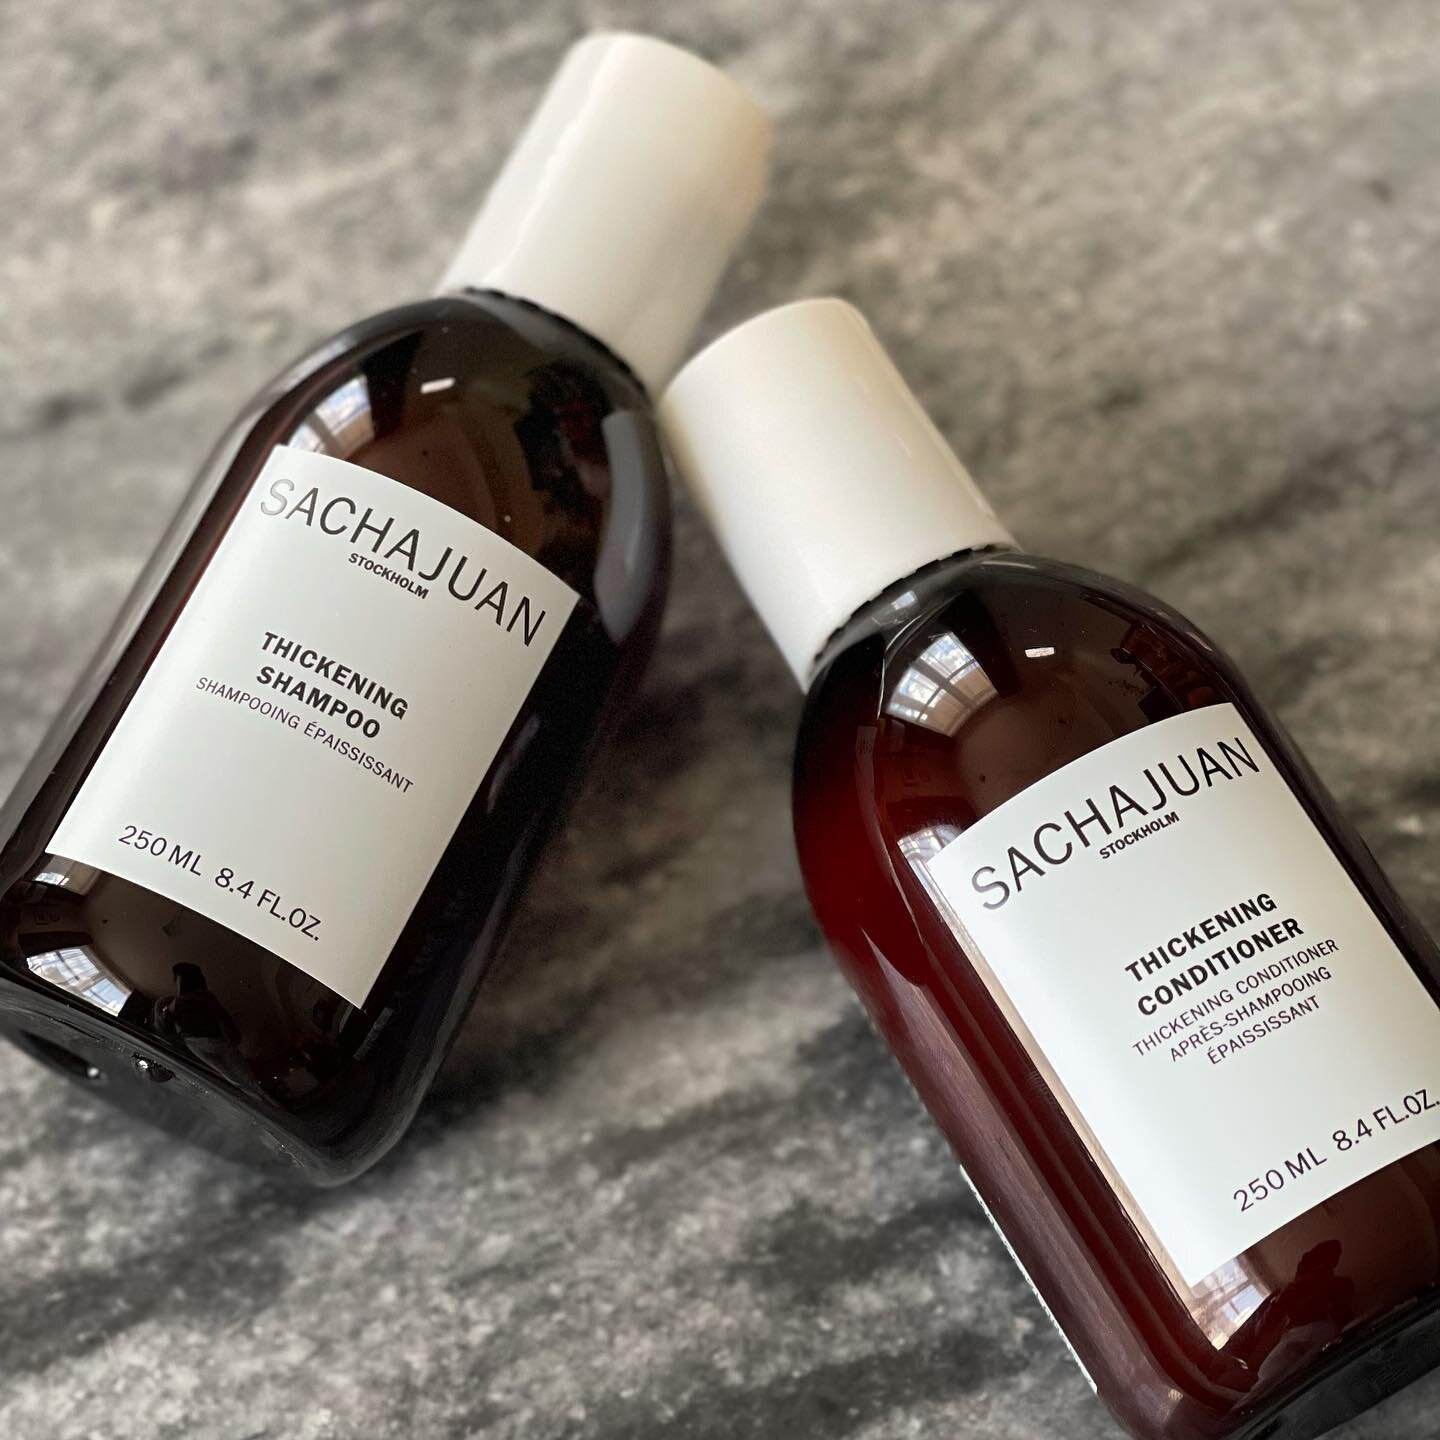 Sachajuan is my go-to haircare line for clients looking to elevate their grooming game. Hailing from Sweden, the line offers a straightforward approach to premium haircare. Every product features clear and succinct instructions to ensure ease of use.